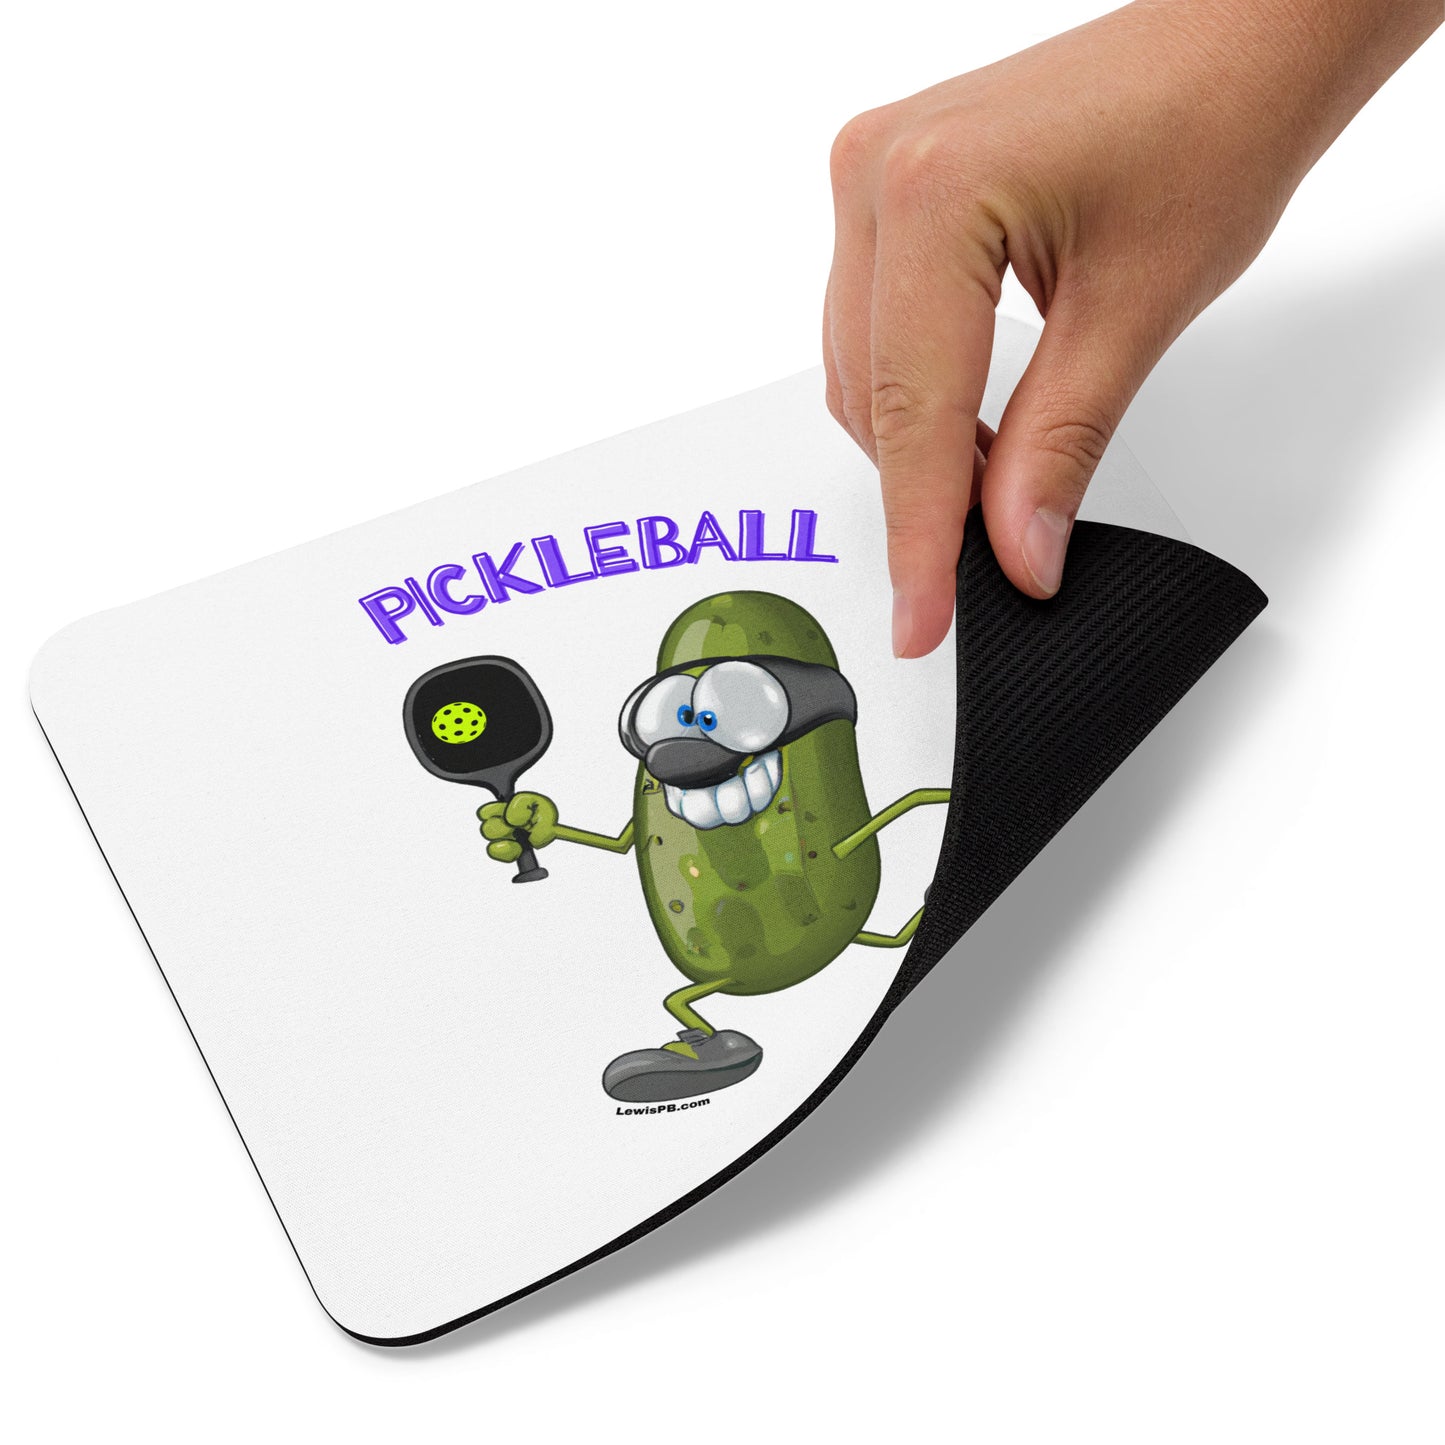 Pickleball Mouse Pad | "Pickle"